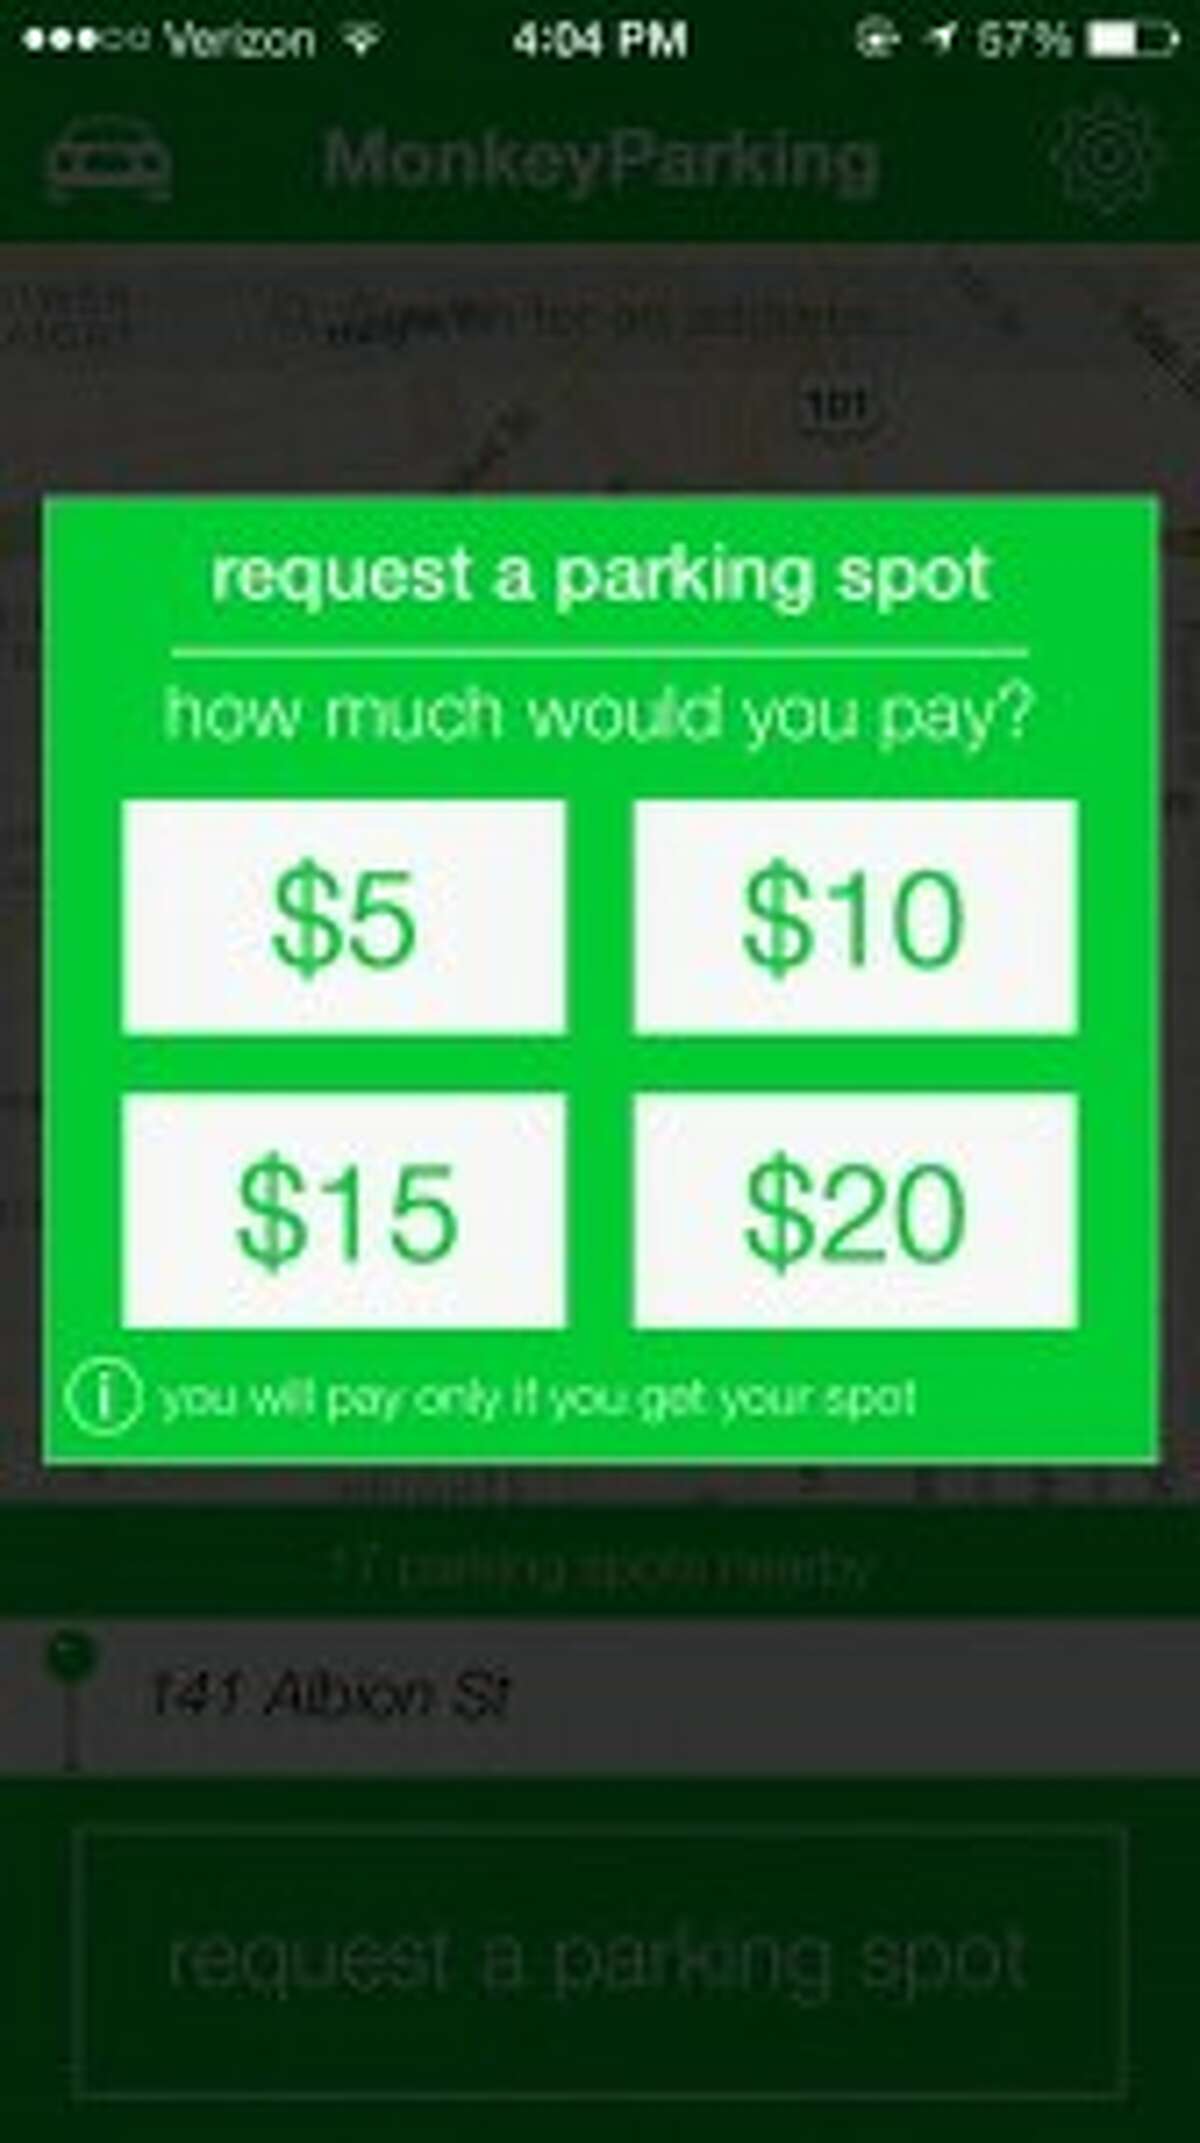 MonkeyParking had disabled its bidding function in San Francisco last summer.